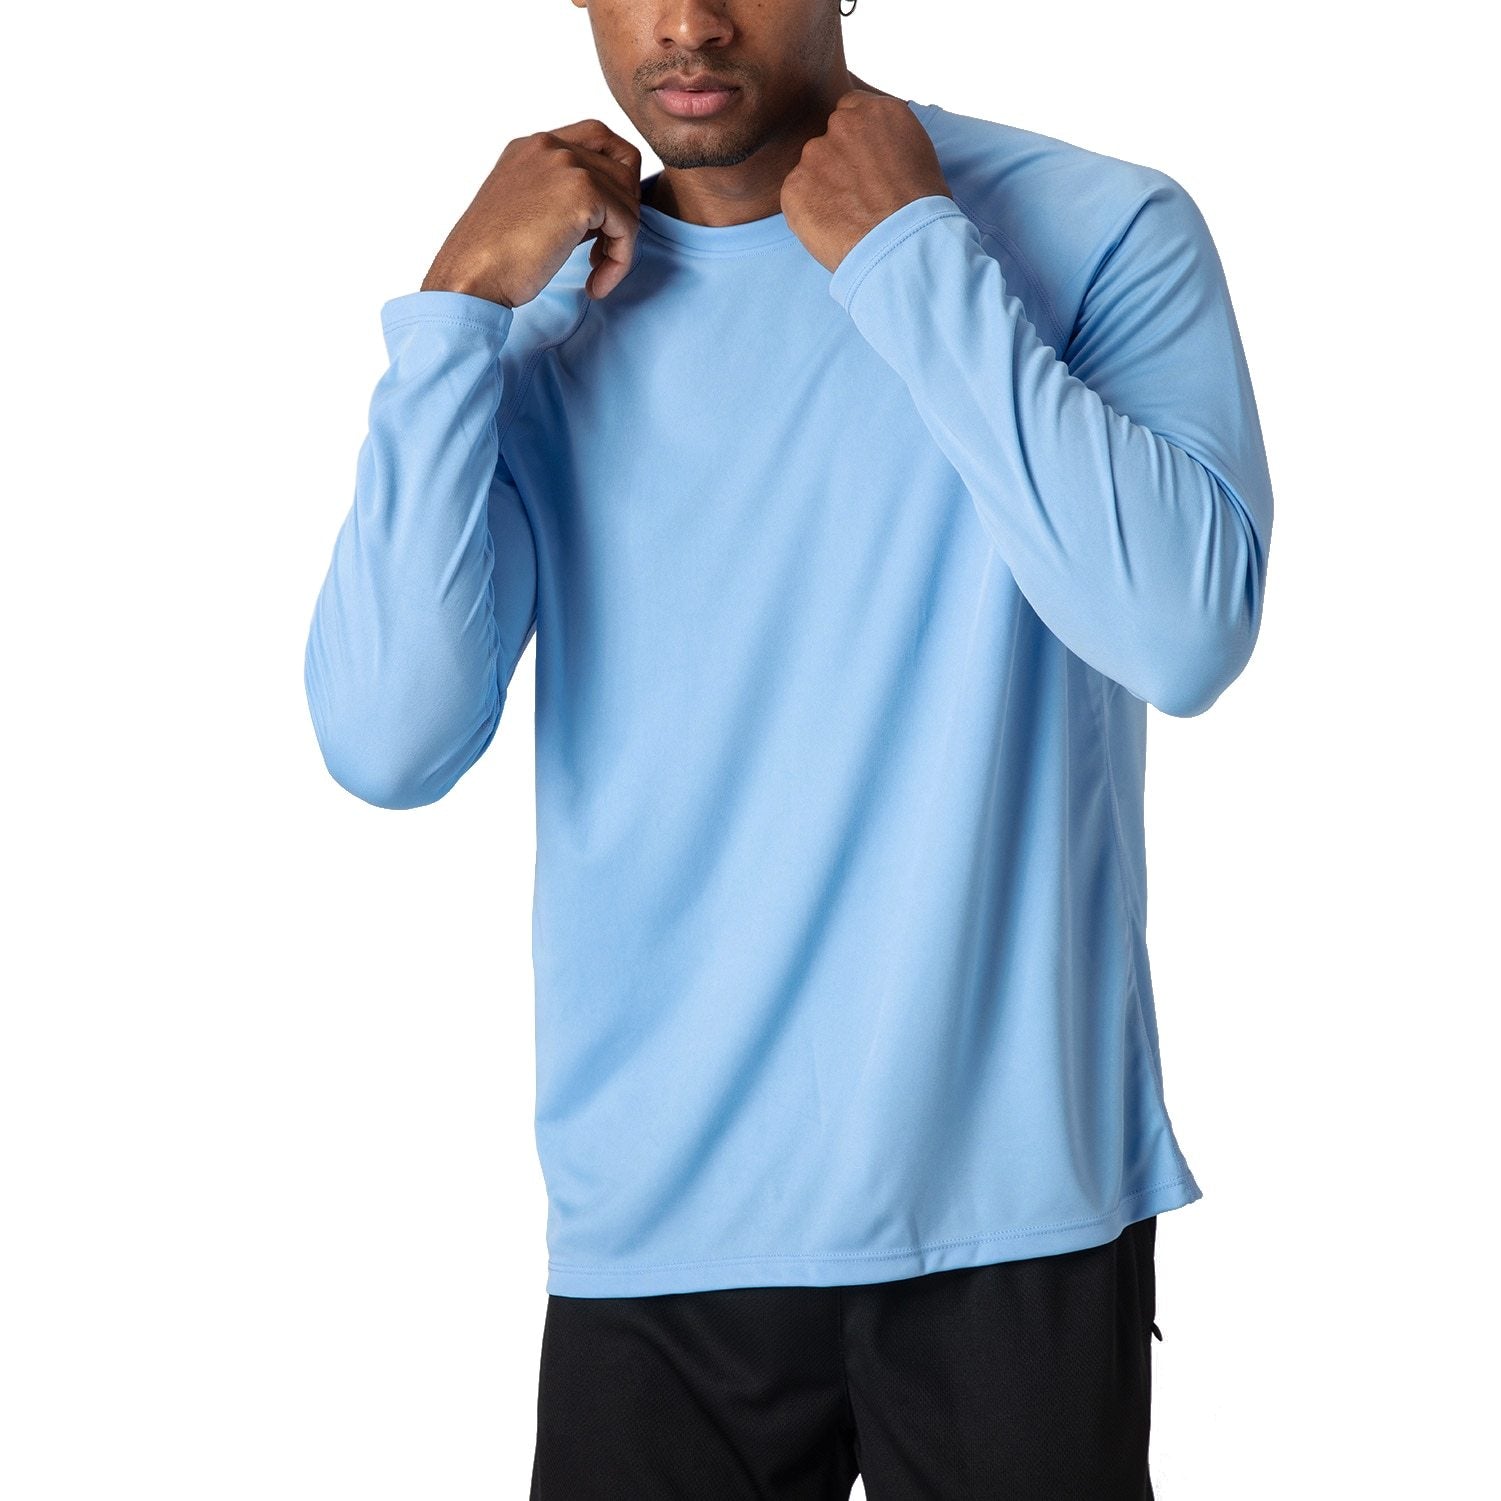 Male model wearing a sky blue, long sleeve t-shirt for sun protection.